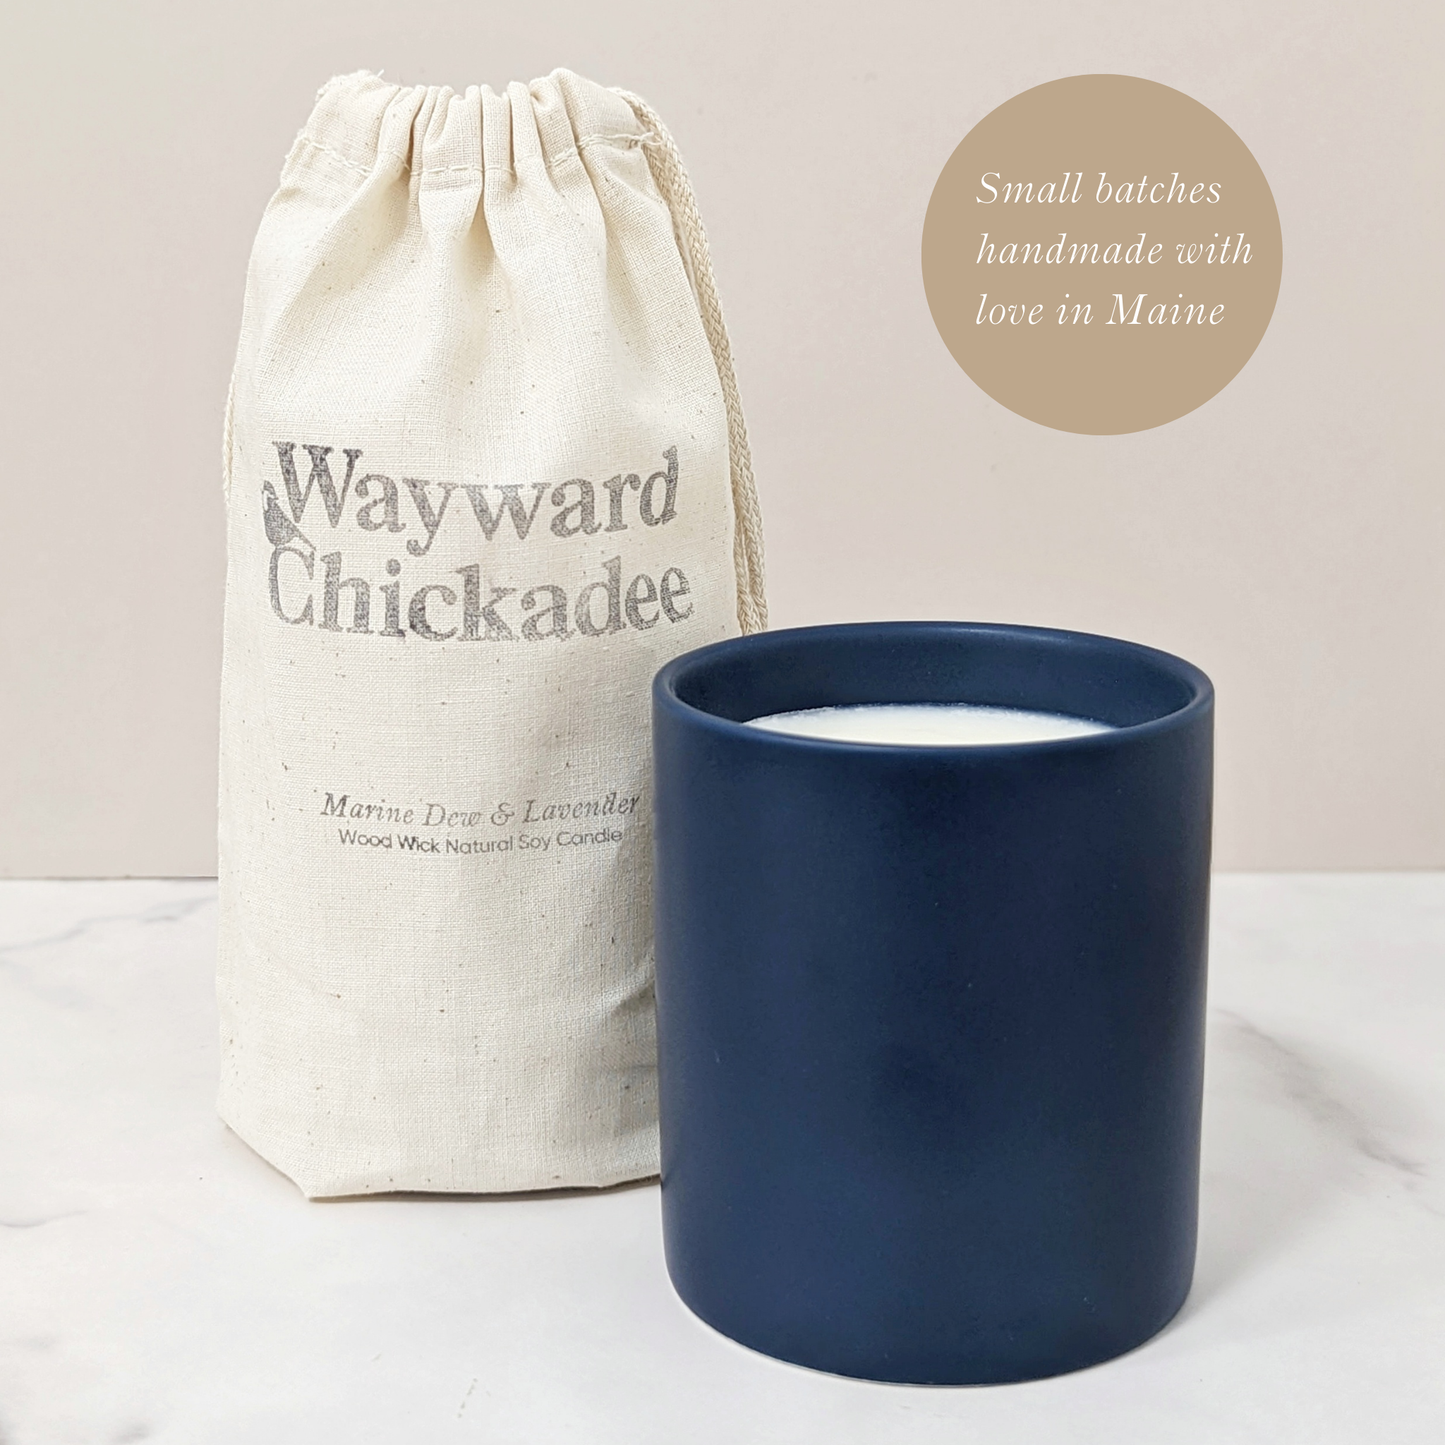 Marine Dew & Wild Lavender 12oz | Wooden Wick Soy Candle